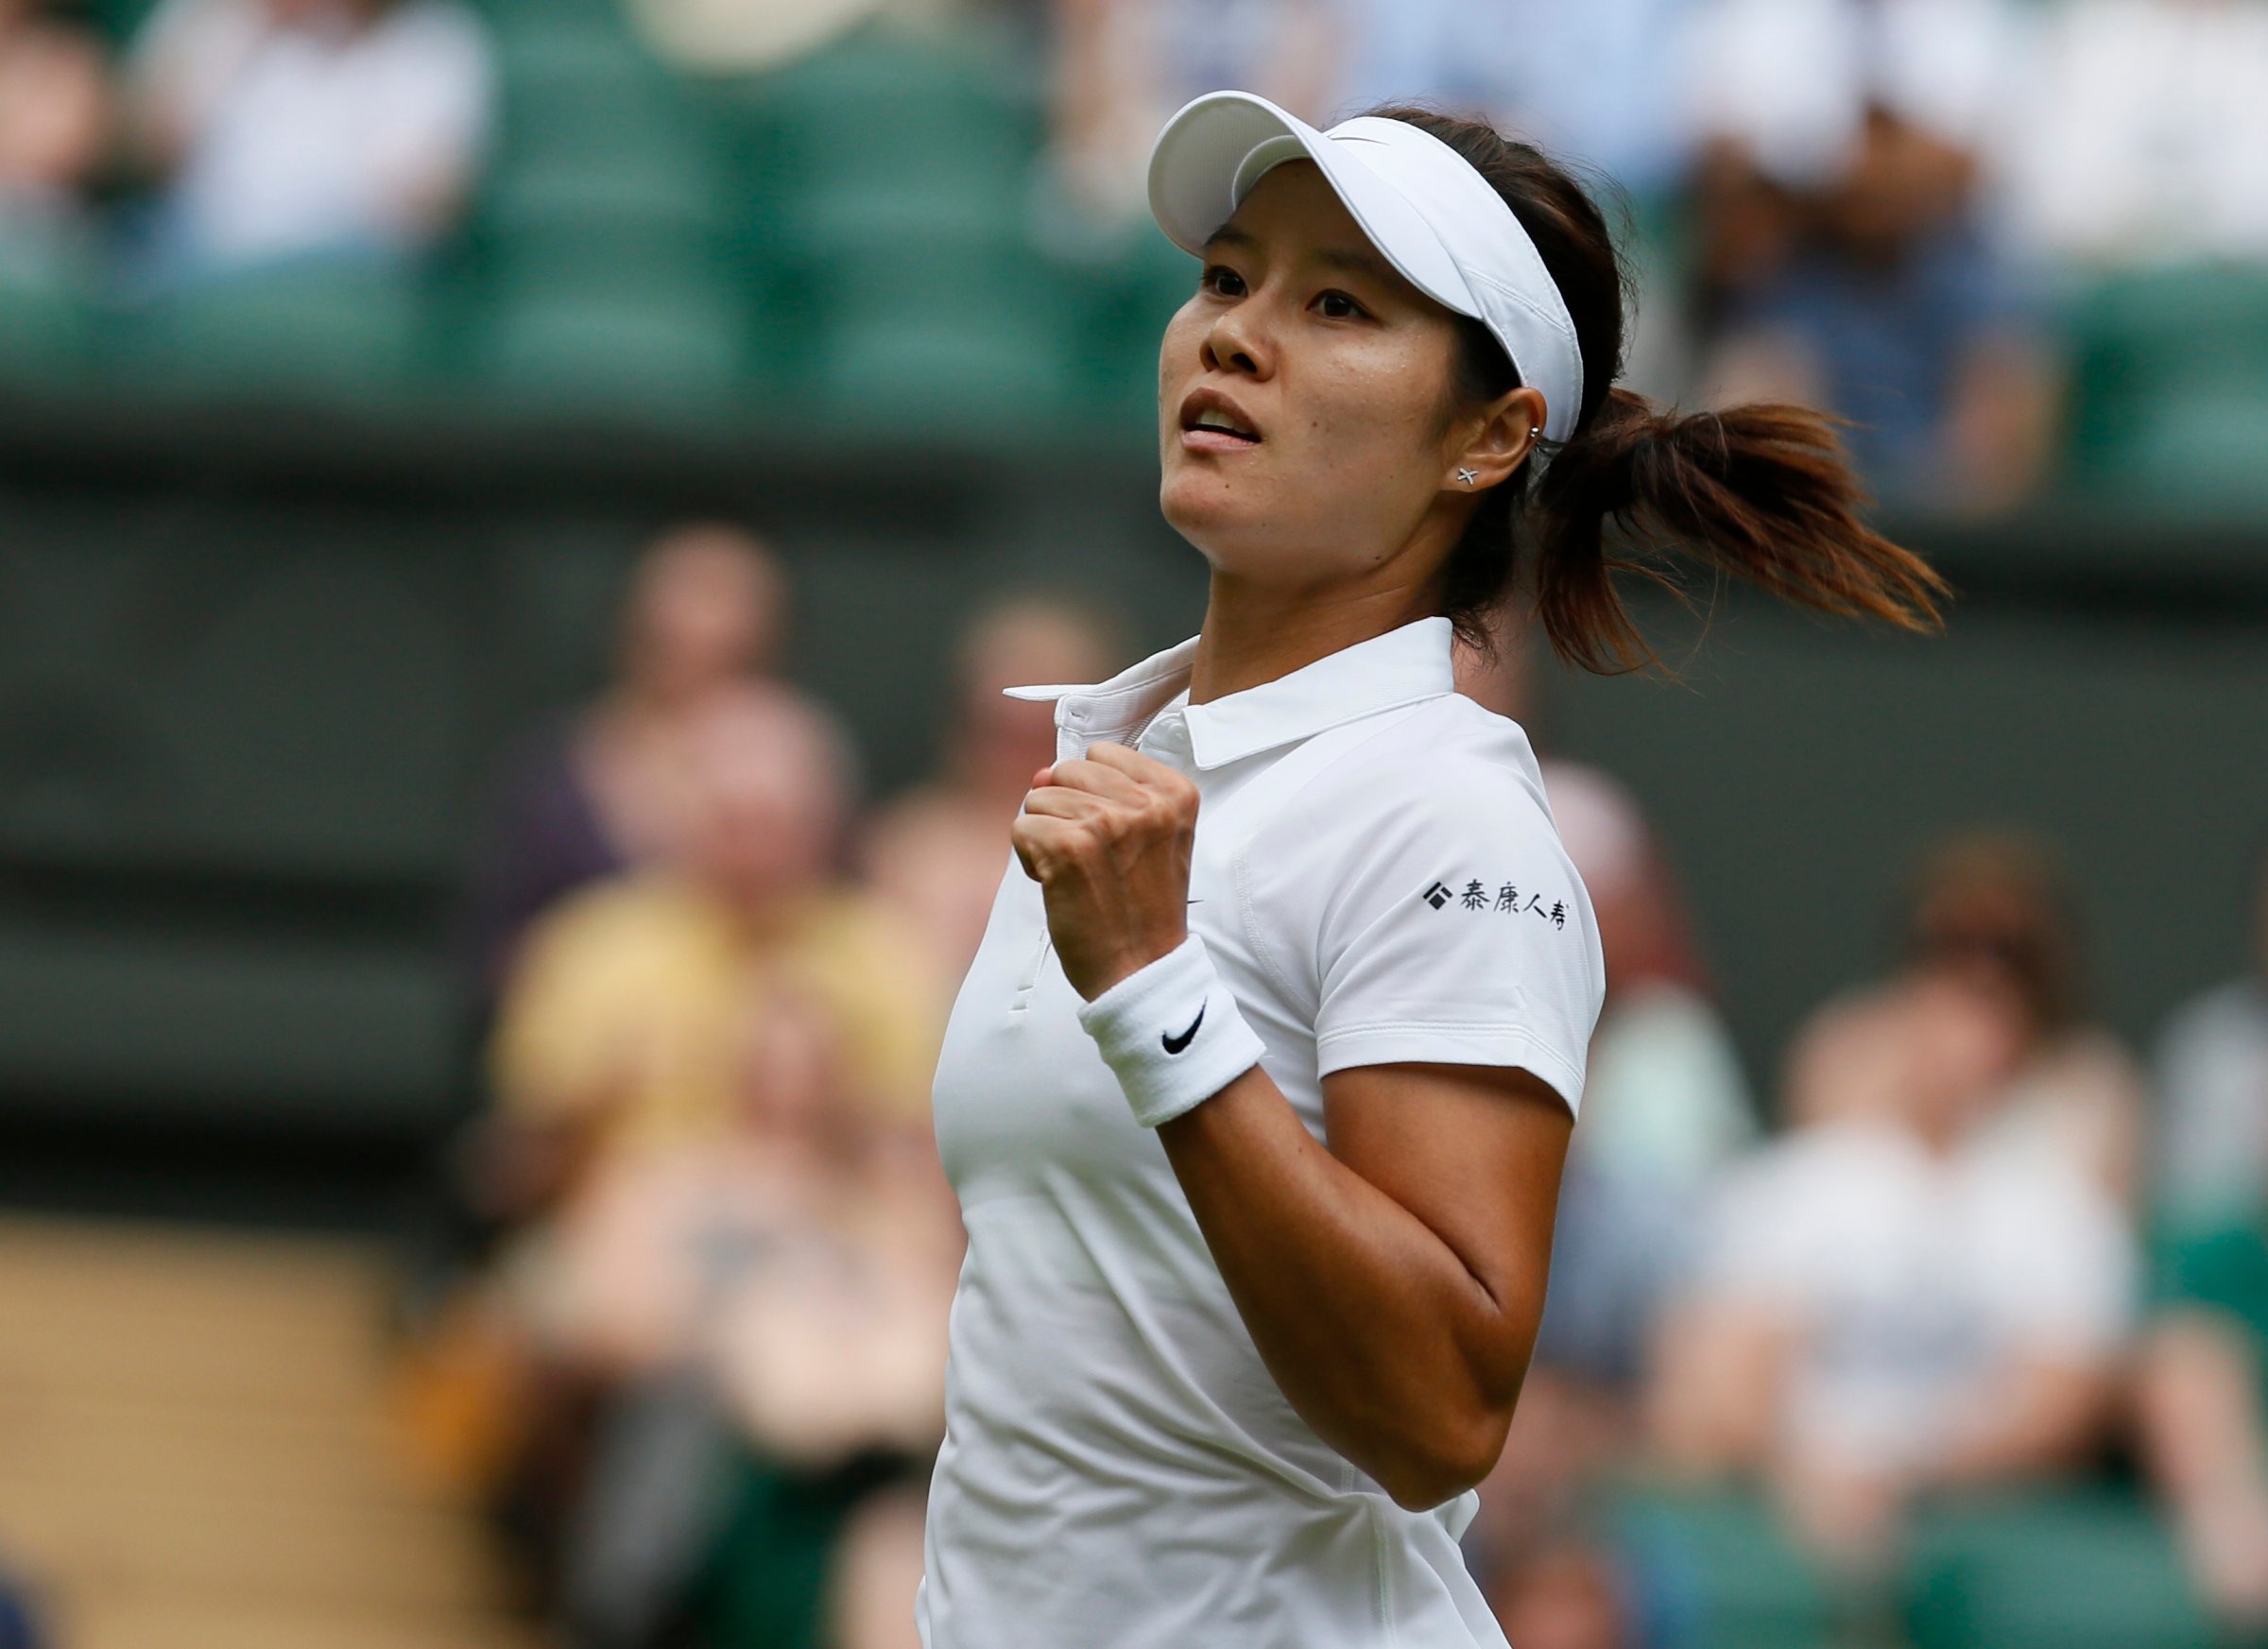 Li Na of China reacts after defeating Paula Kania of Poland in their women's singles tennis match at the Wimbledon Tennis Championships, in London